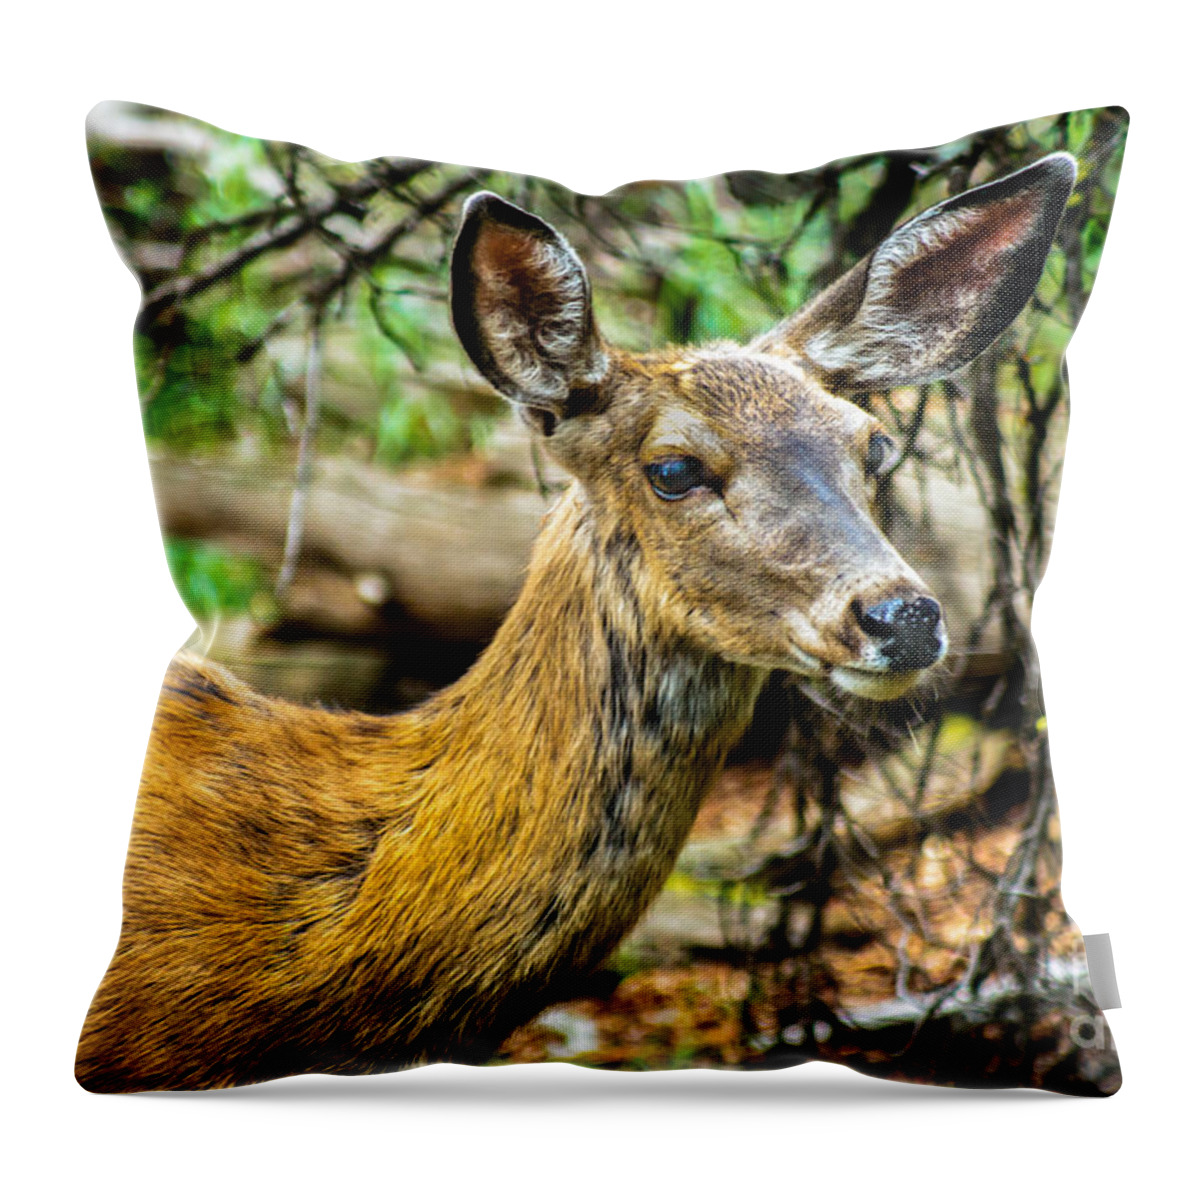 Blacked-tail Throw Pillow featuring the photograph Back-tail Doe by Robert Bales